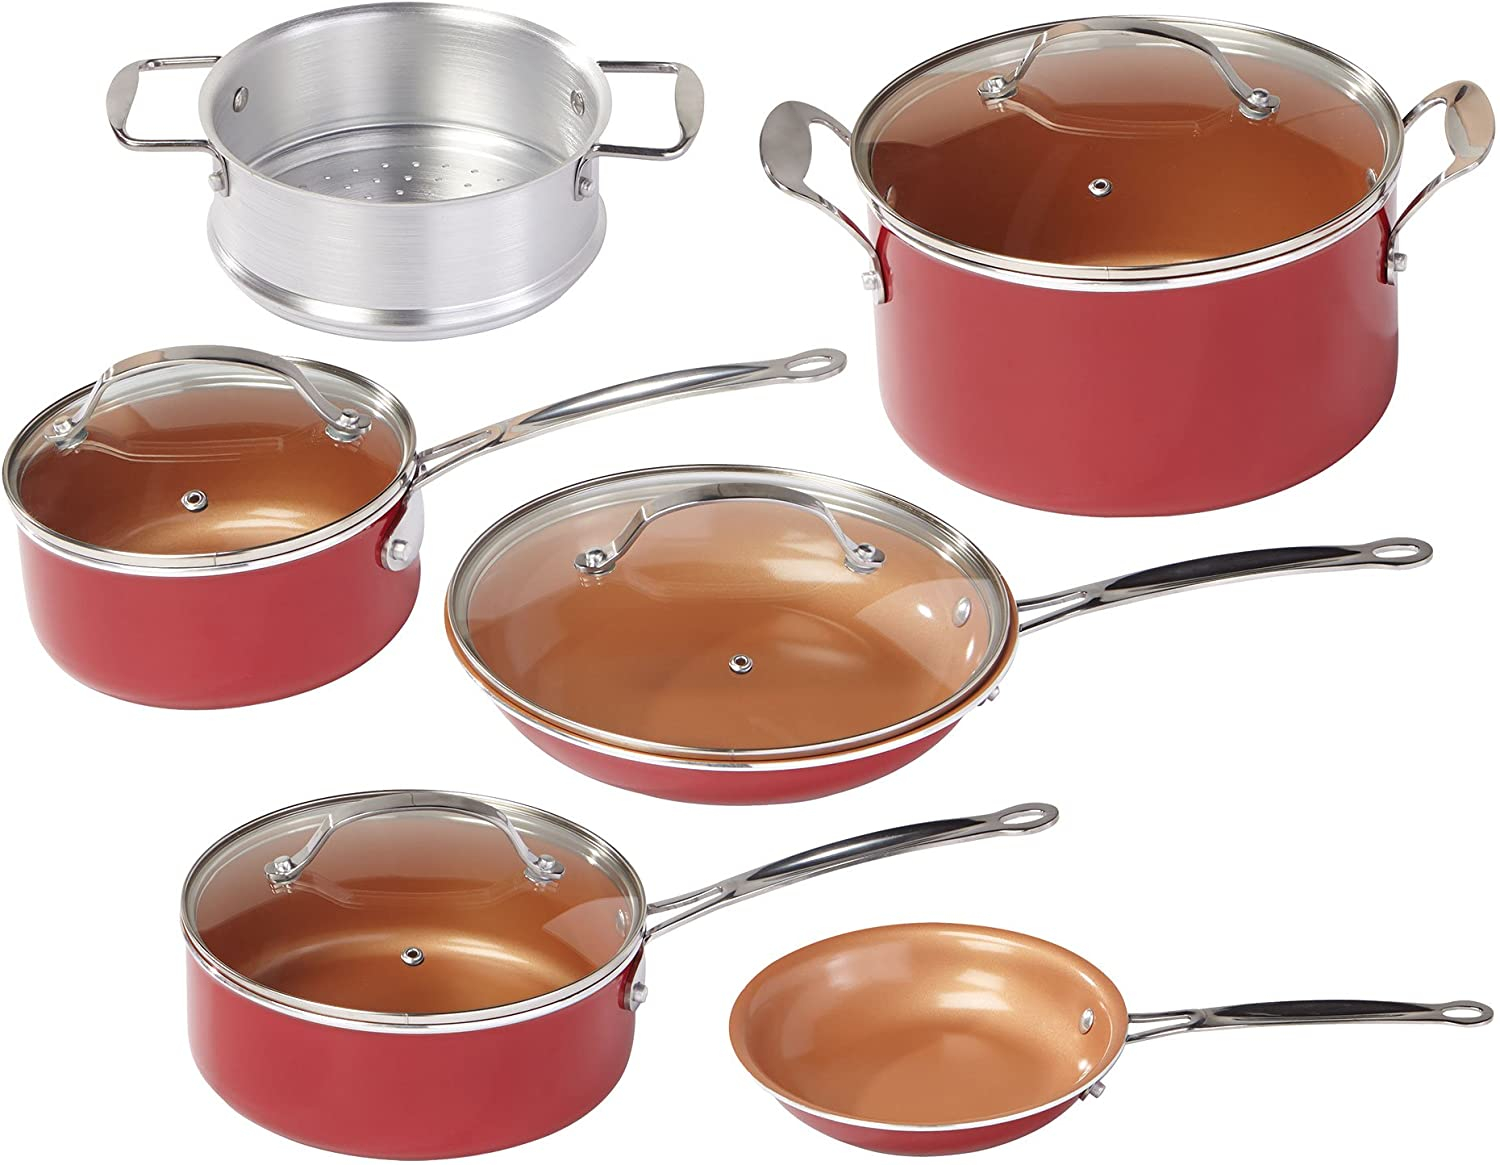 BulbHead 10824 Red Copper 10 PC Copper-infused Ceramic Non-stick Cookware Set for sale online 